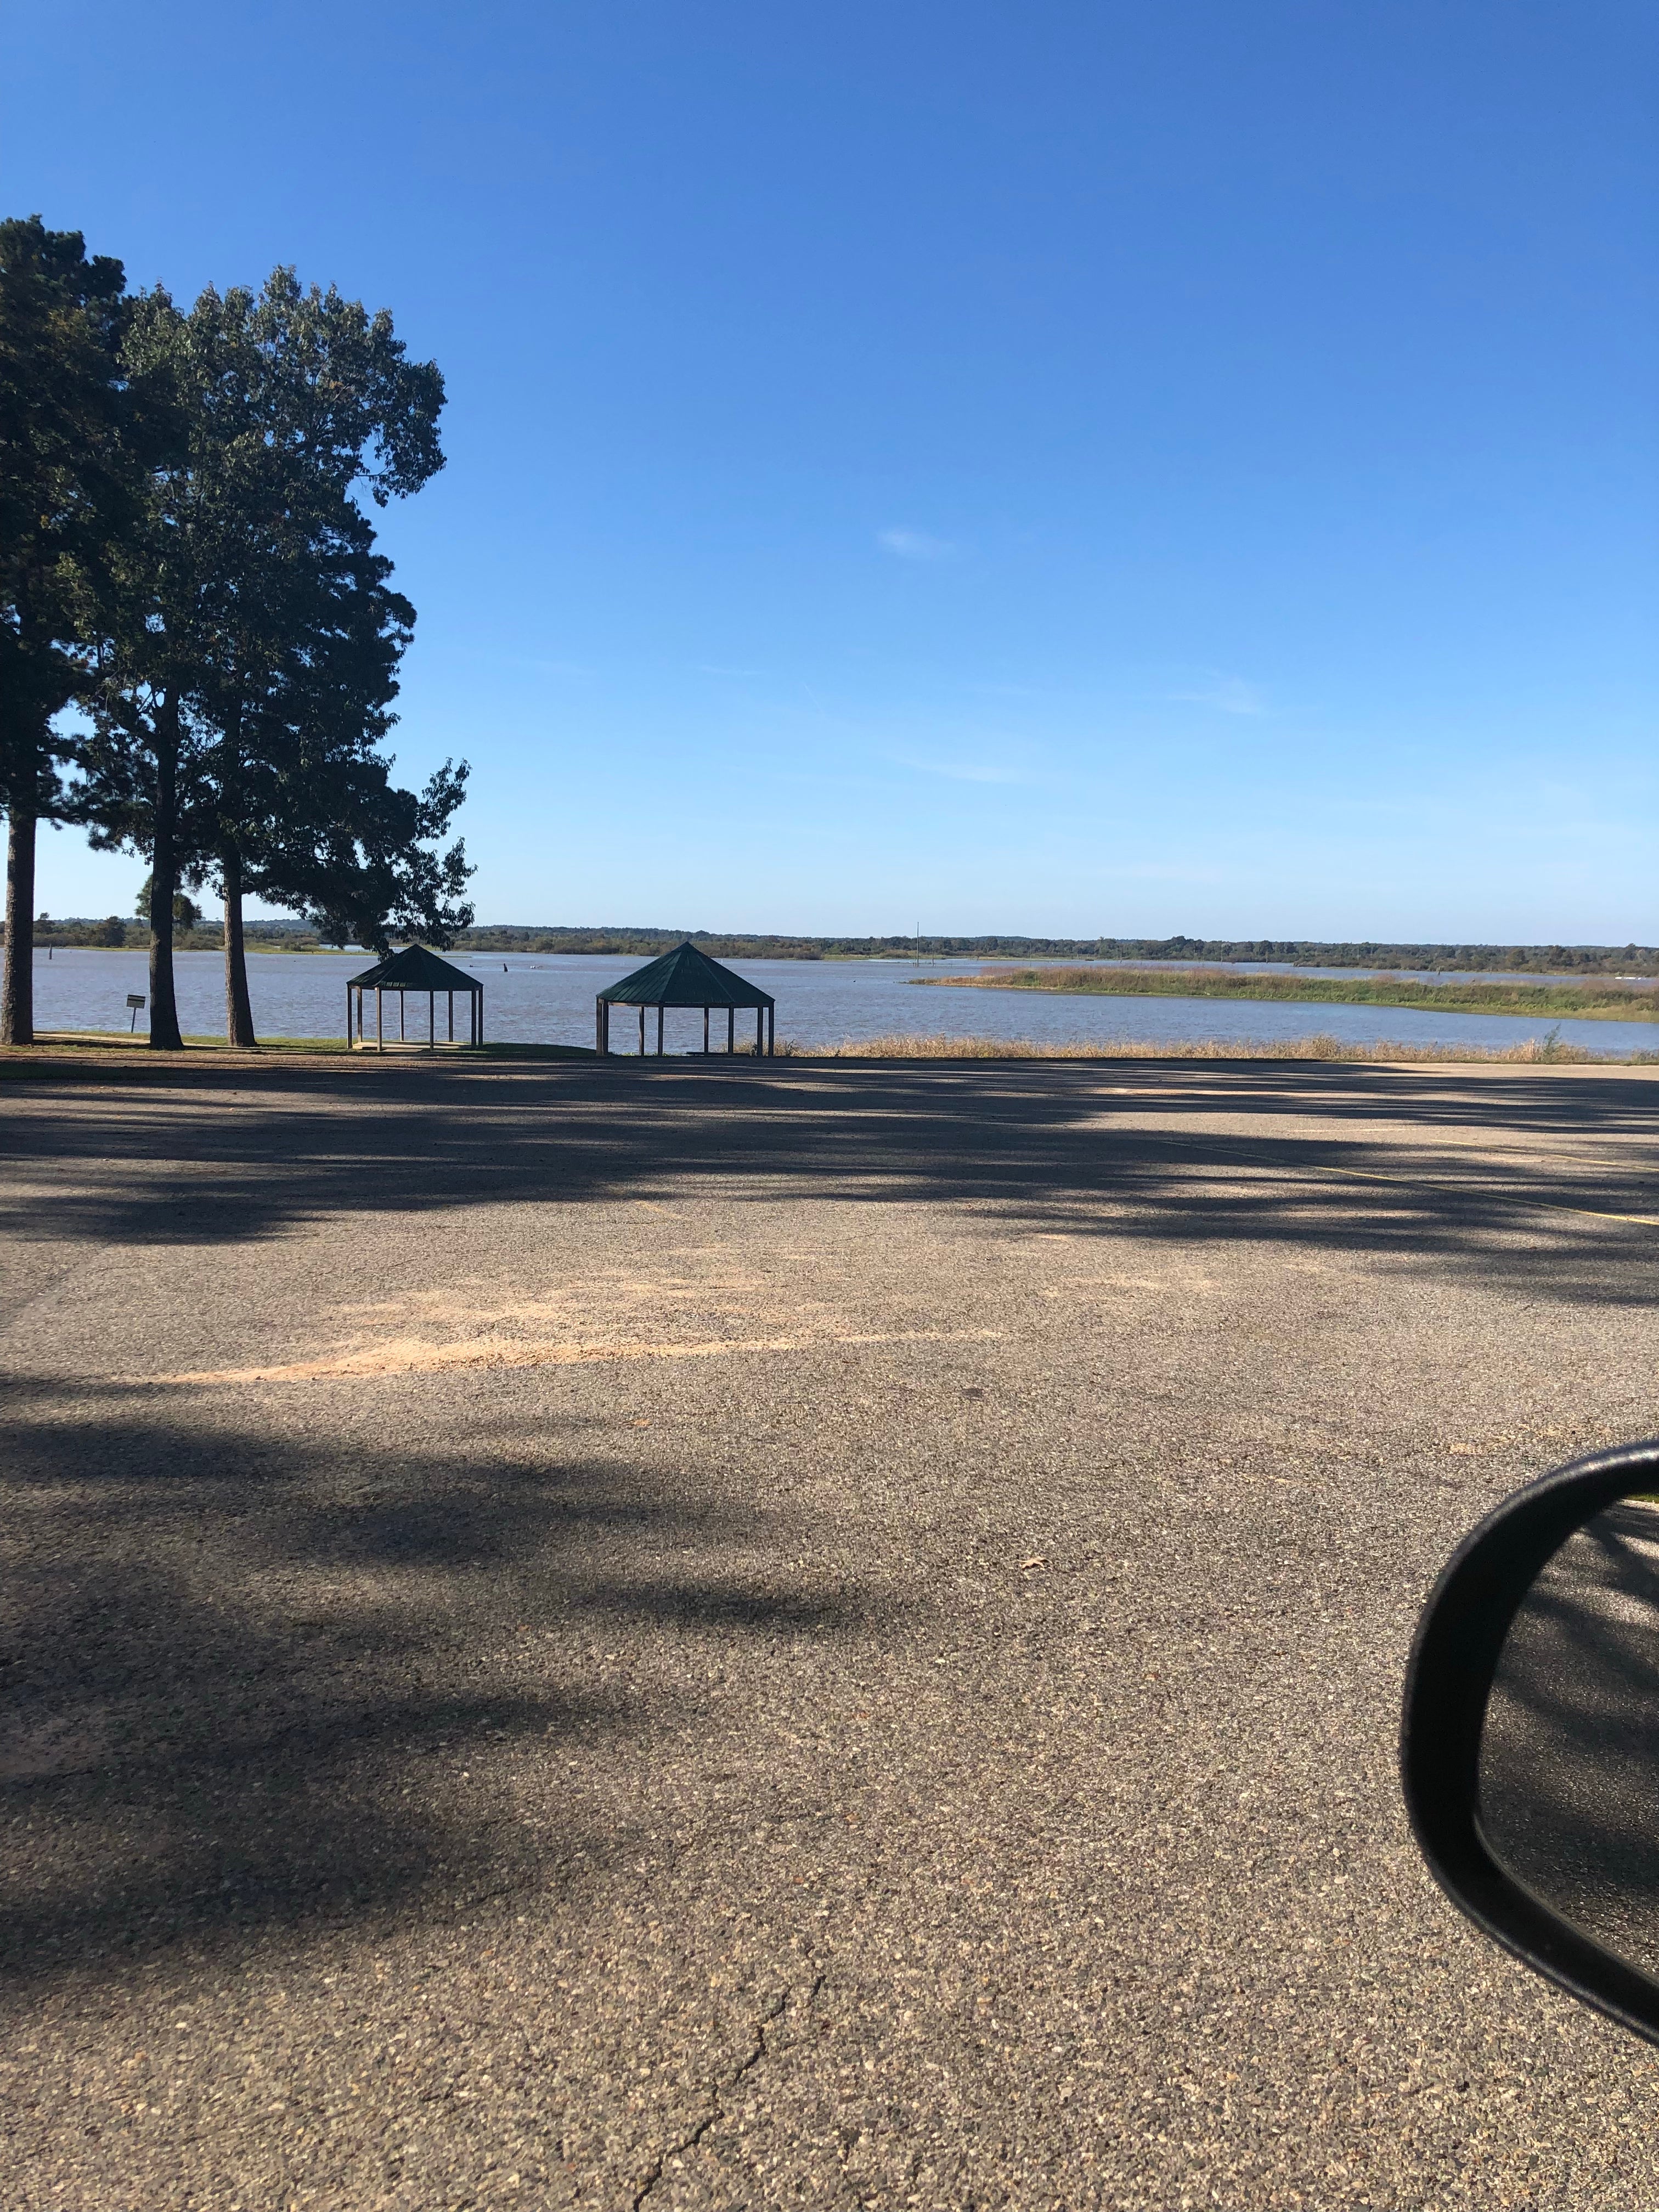 Camper submitted image from Oak Ridge State Rec Area - Toledo Bend Lake - 2